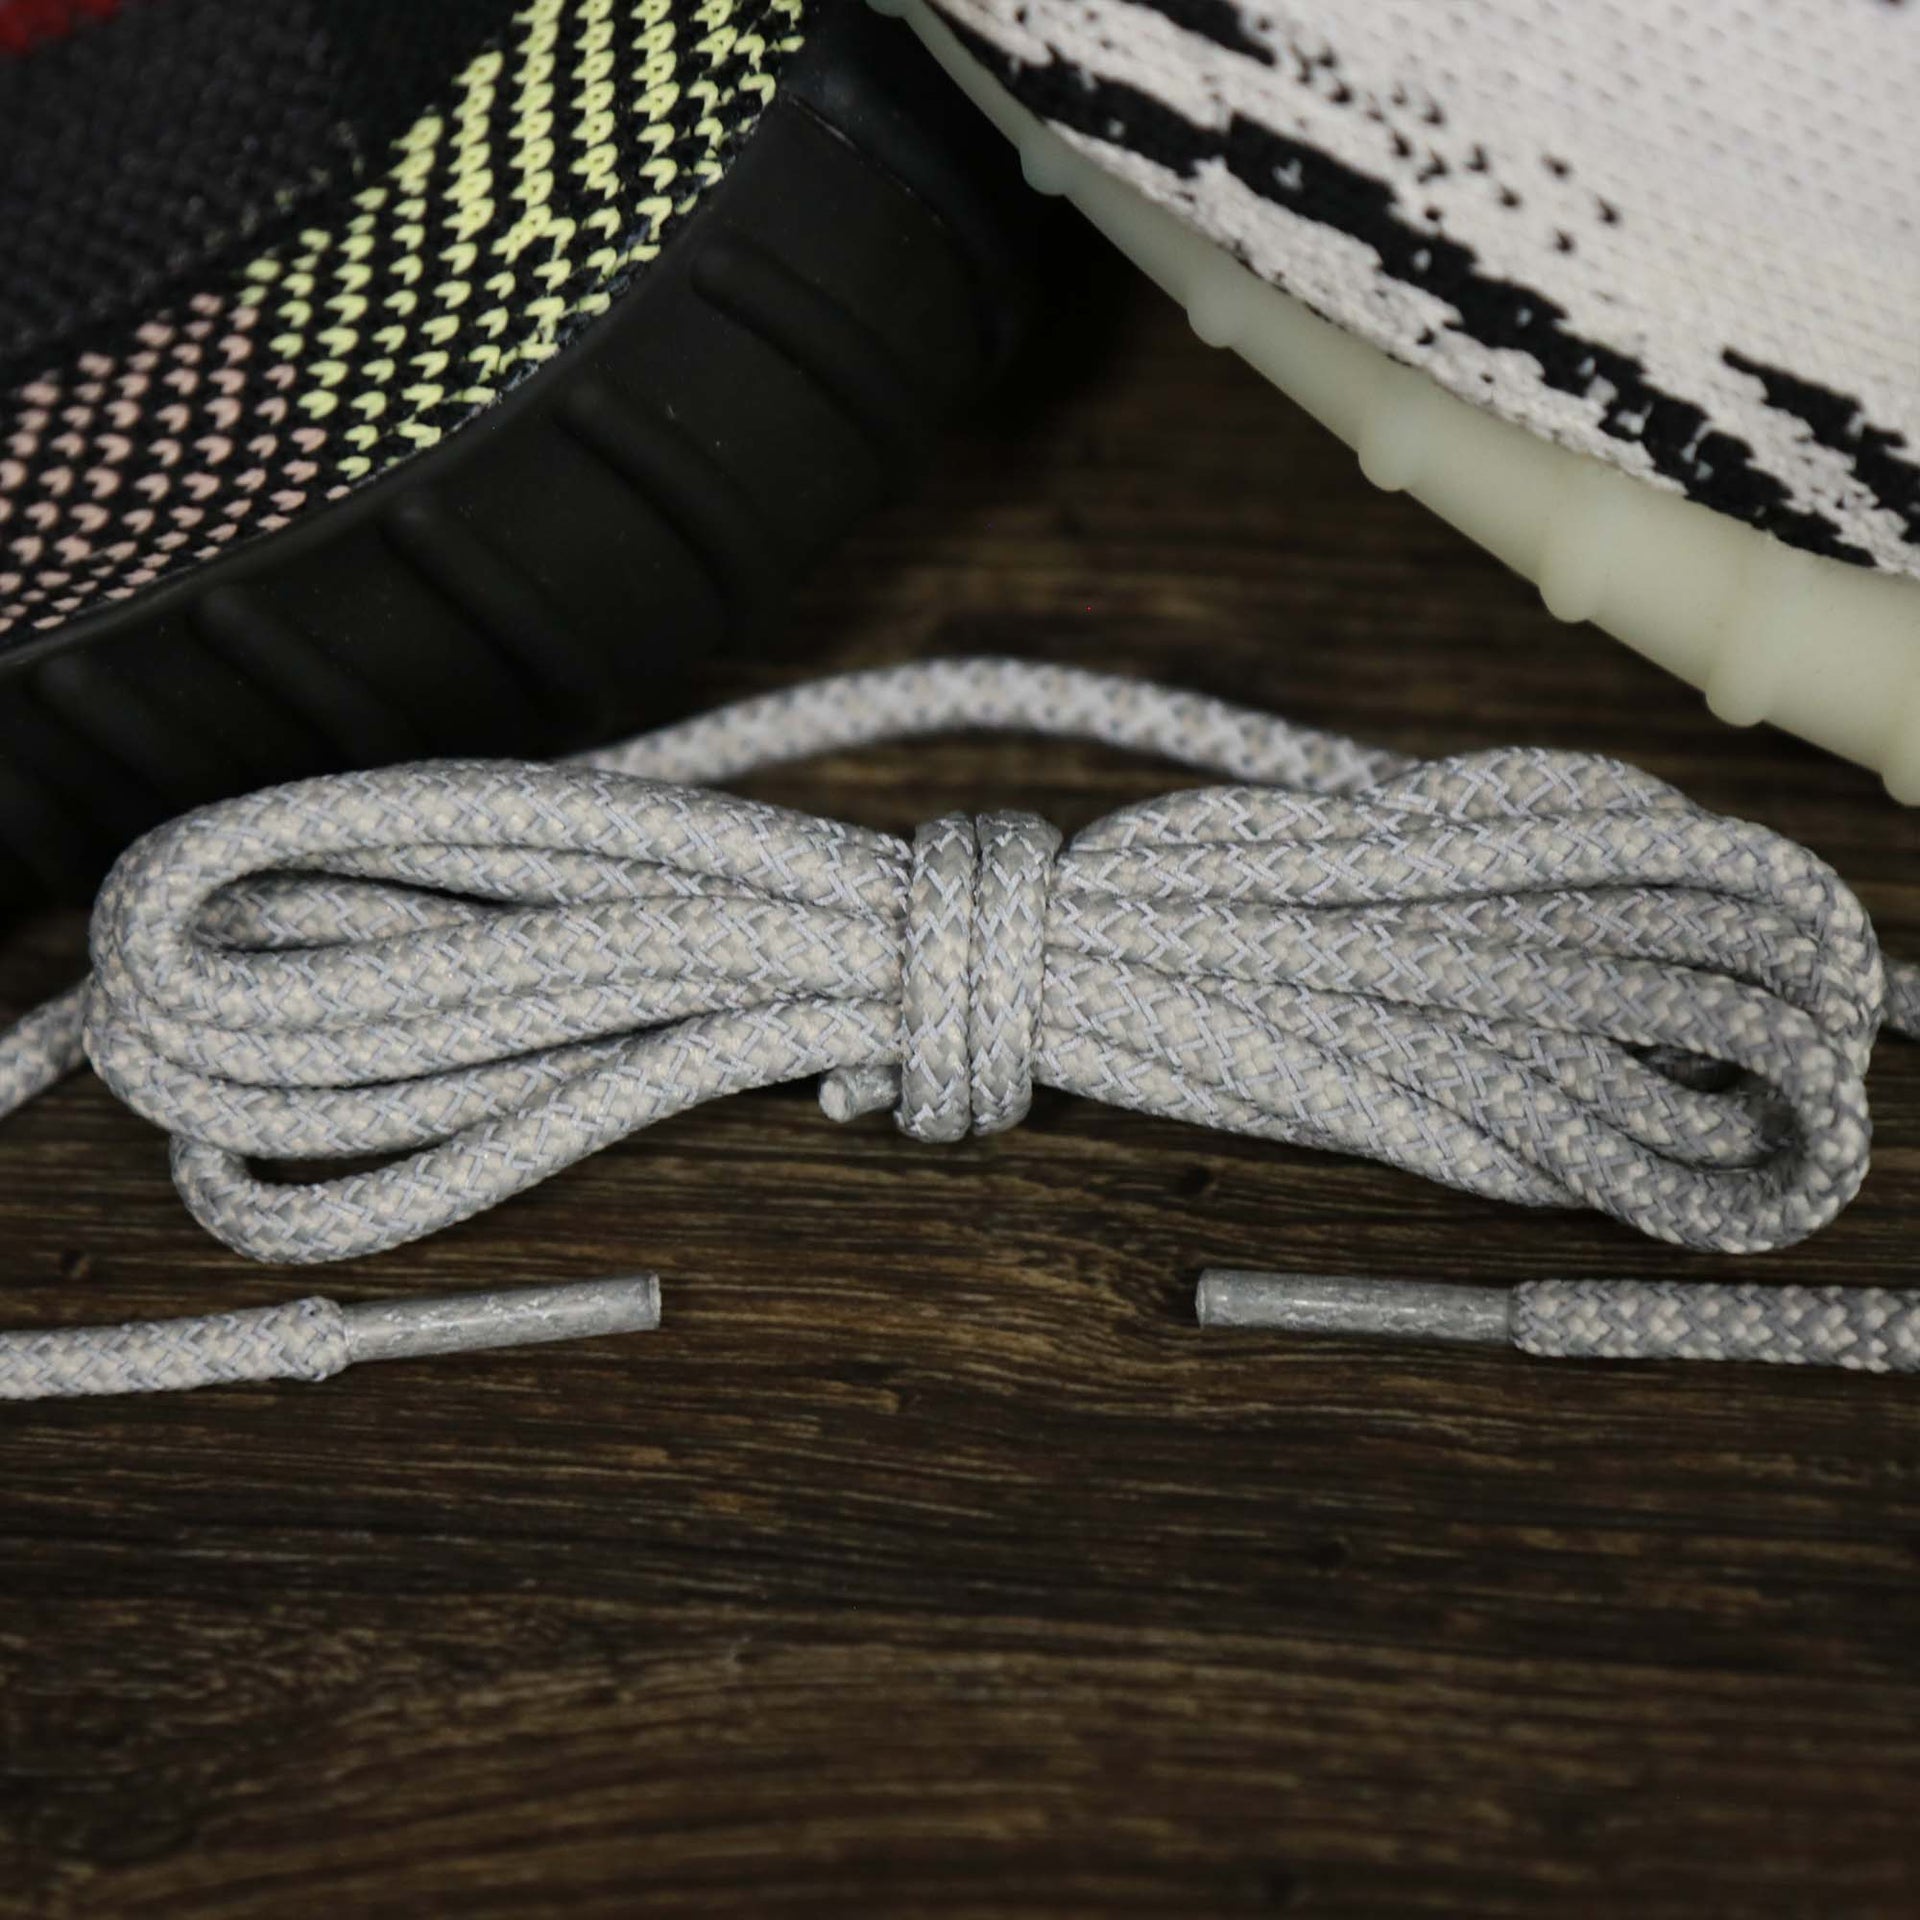 The 3M Reflective White/Gravel Solid Shoelaces with White/Gravel Aglets | 120cm Capswag reflecting and unfolded